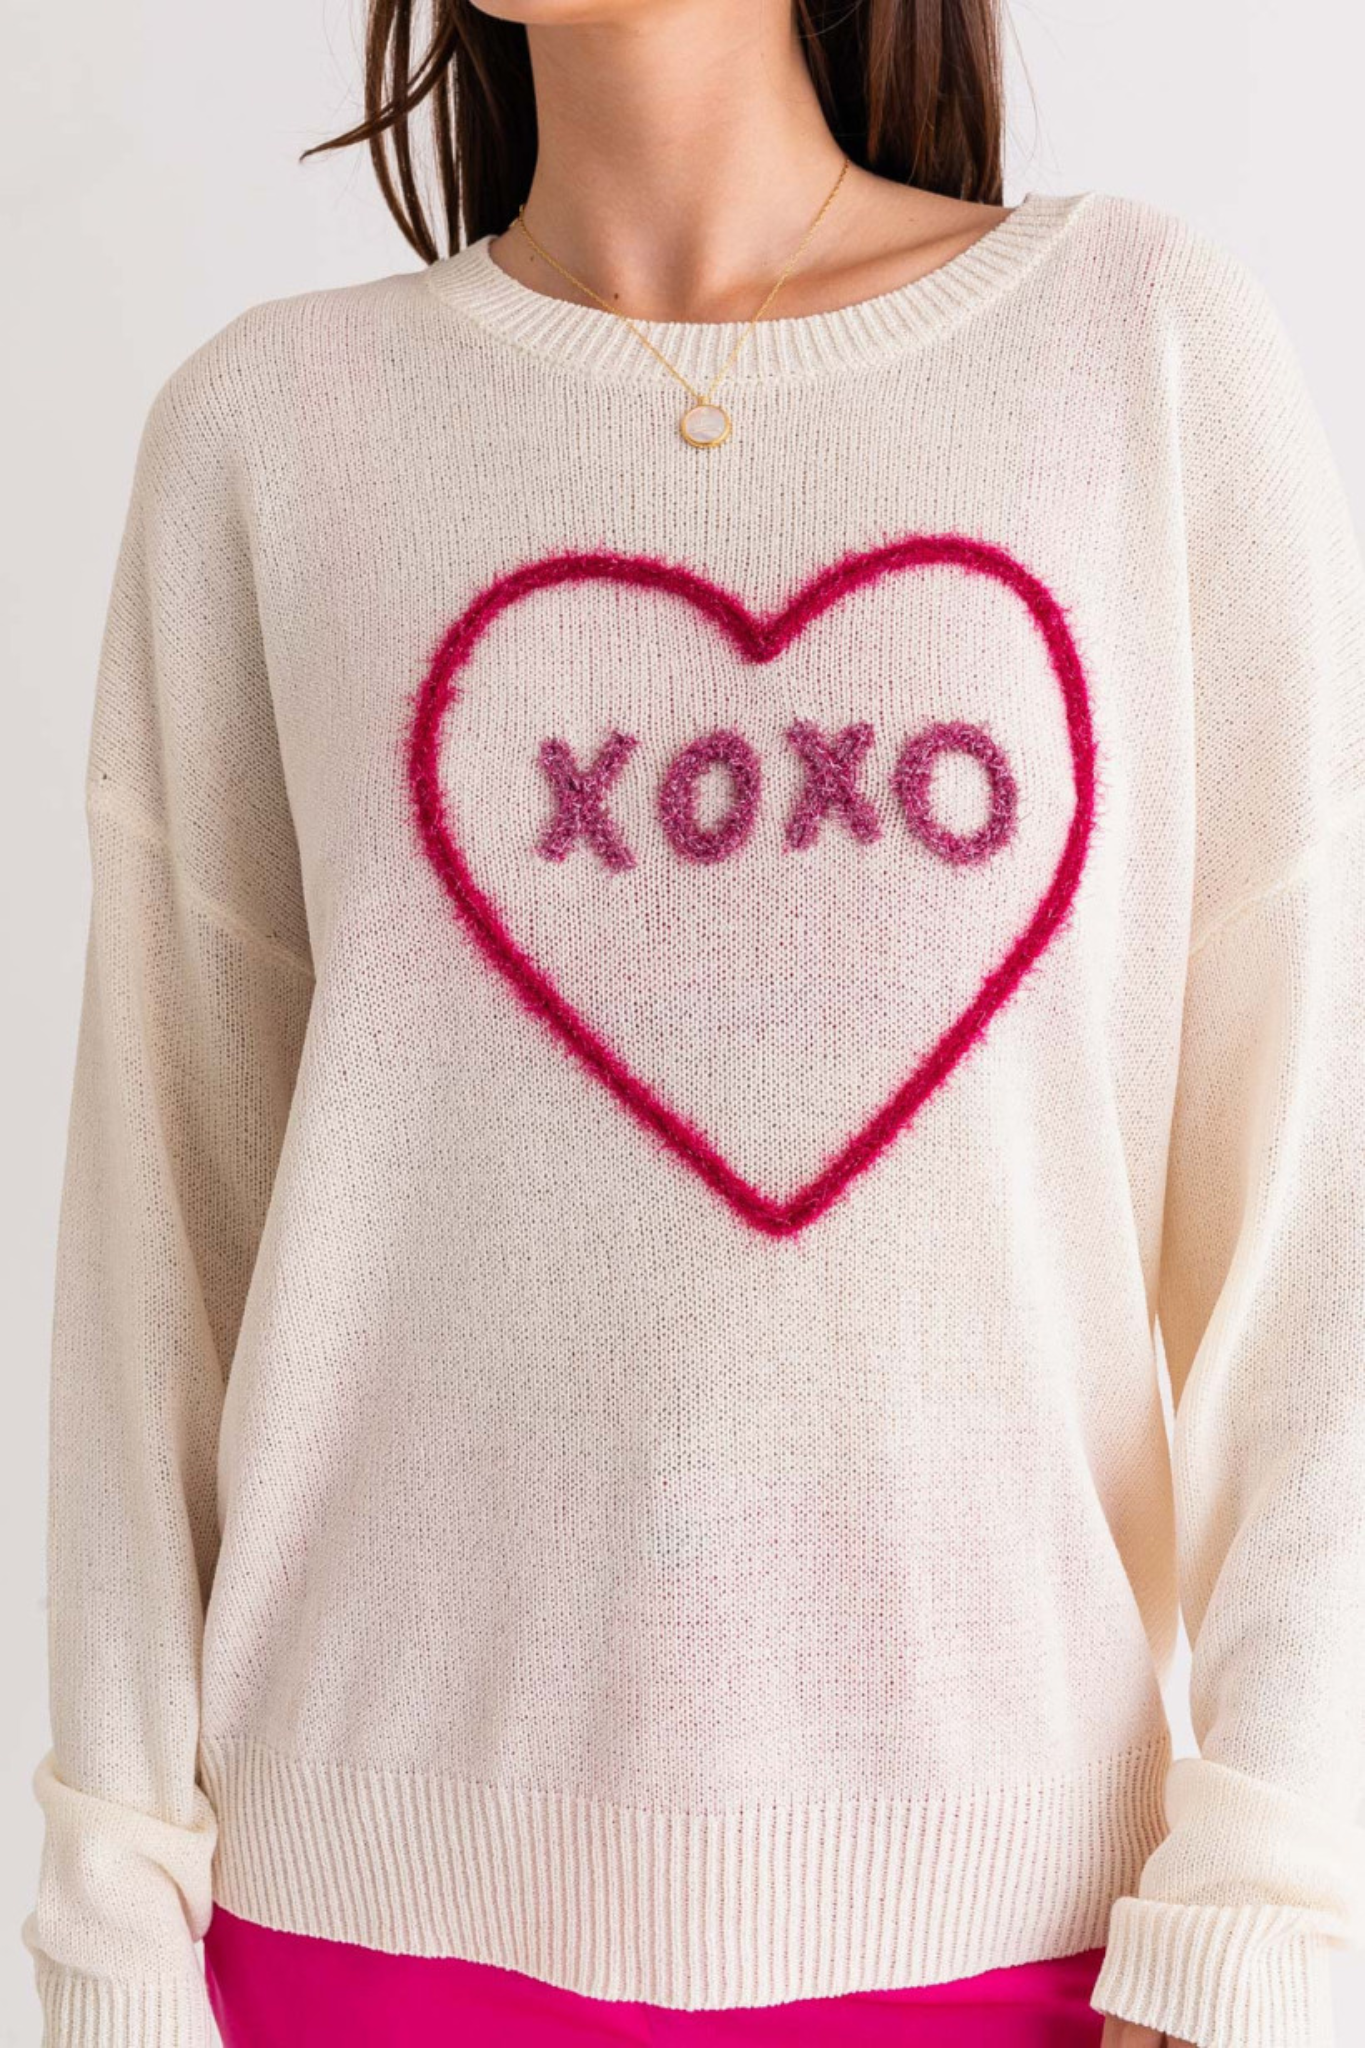 View 5 of XOXO Sweater Top, a Sweaters from Larrea Cove. Detail: .